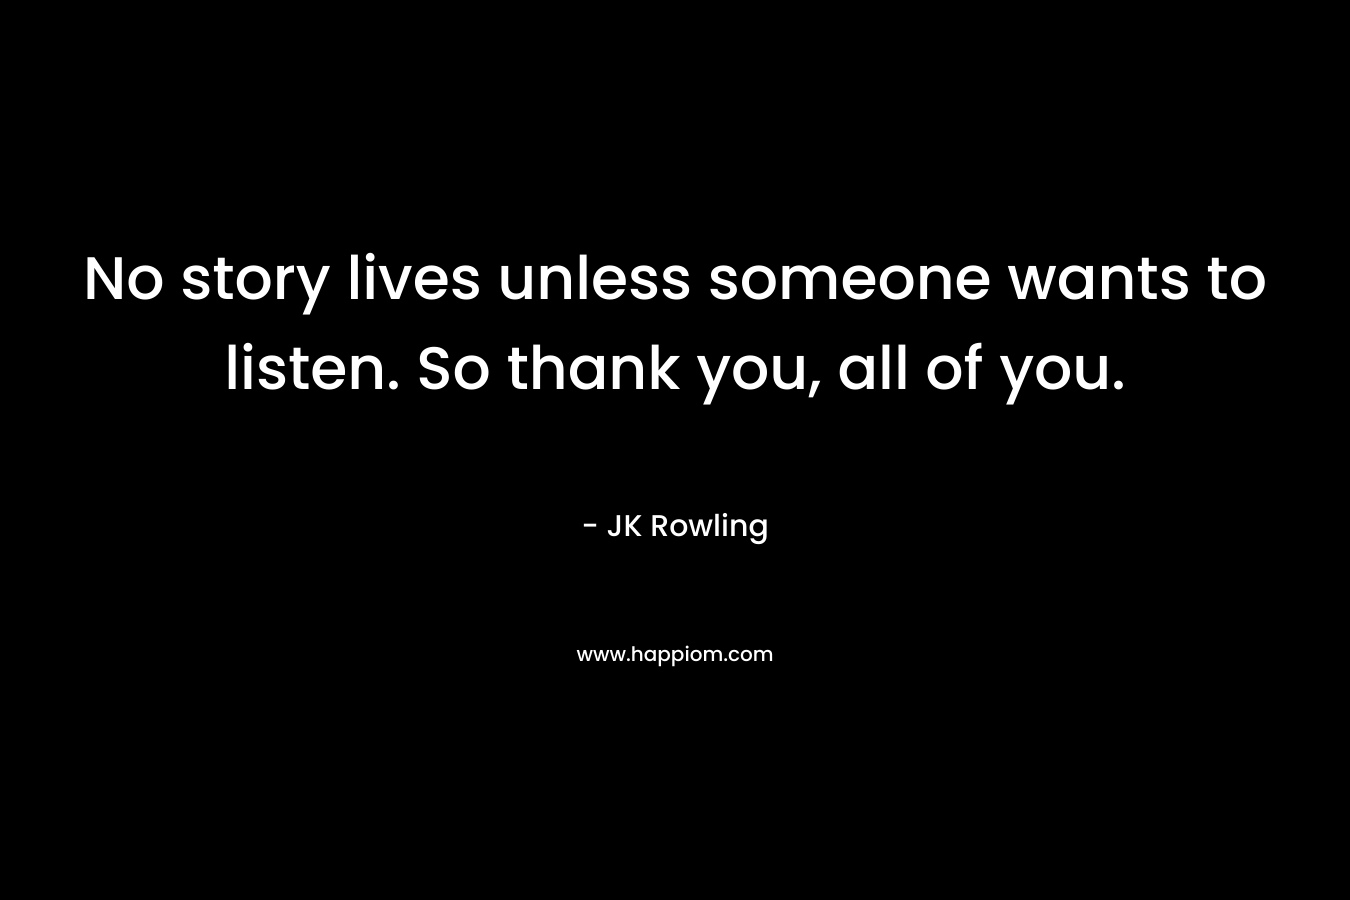 No story lives unless someone wants to listen. So thank you, all of you.